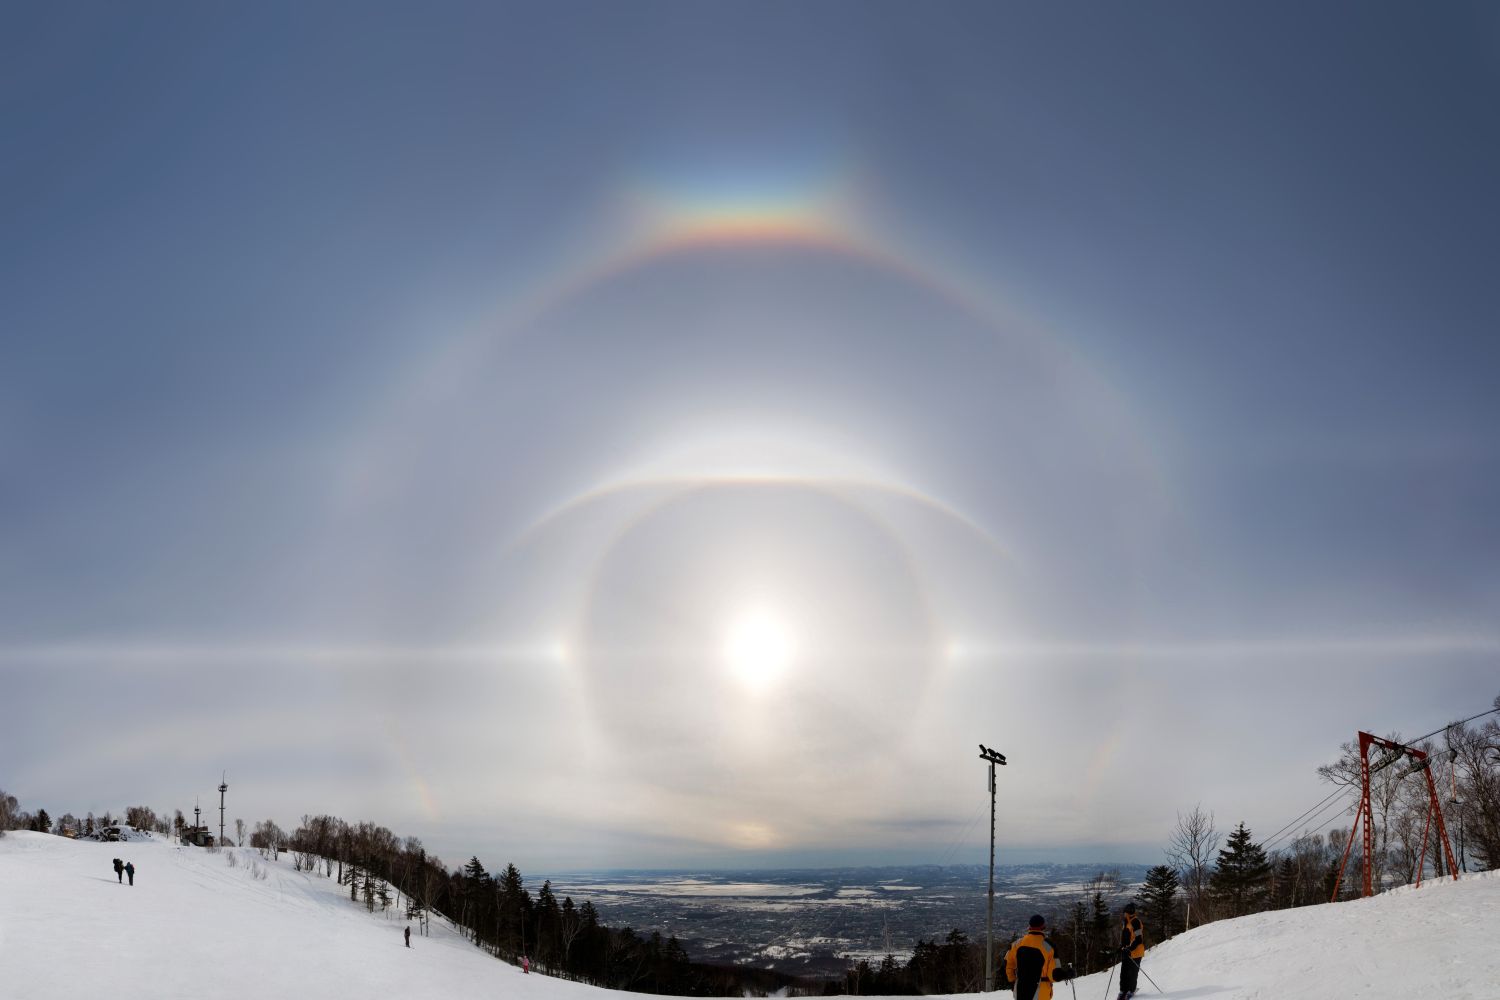 eye in the sky, sun halo eye in the sky, sun halo picture, best sun halo picture, eye in the sky phenomenon, best eye in the sky picture, big brother is watching you